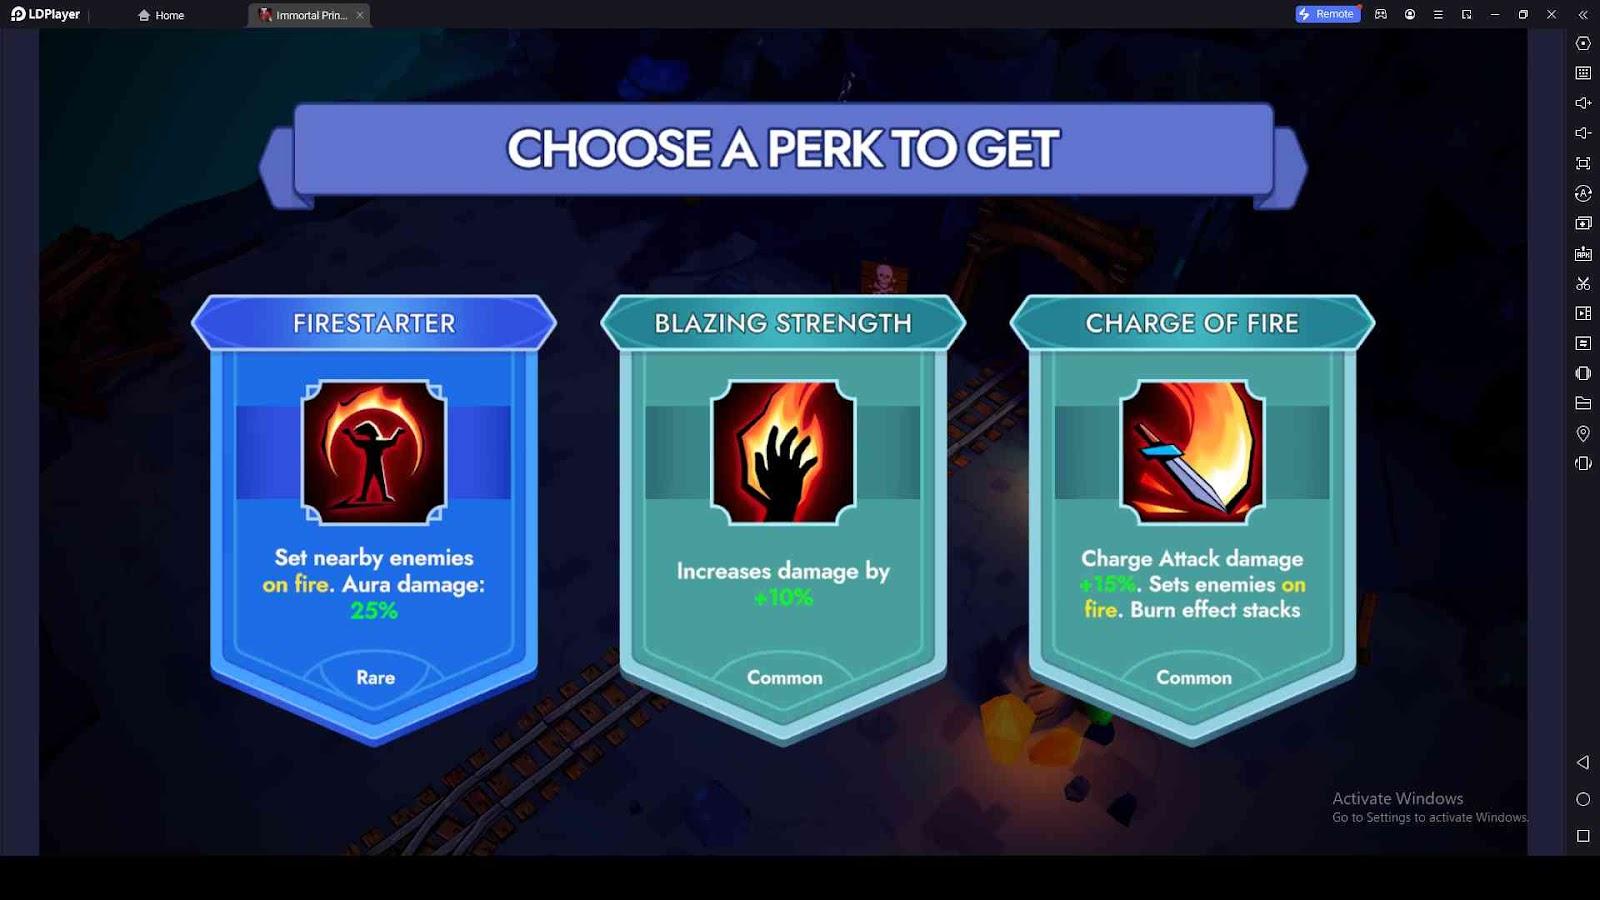 Select Perks Wisely